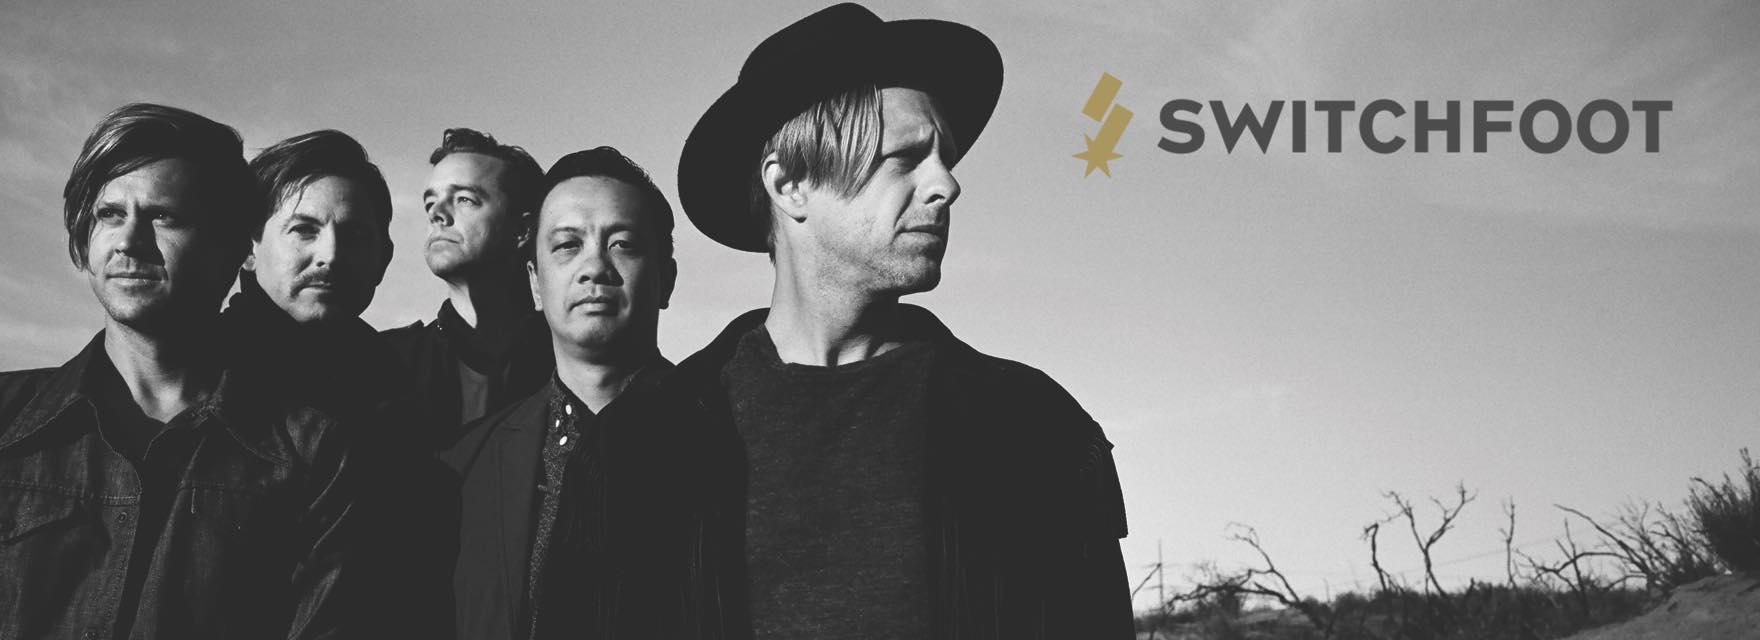 Switchfoot and Relient K Announce Fall Tour! Stage Right Secrets